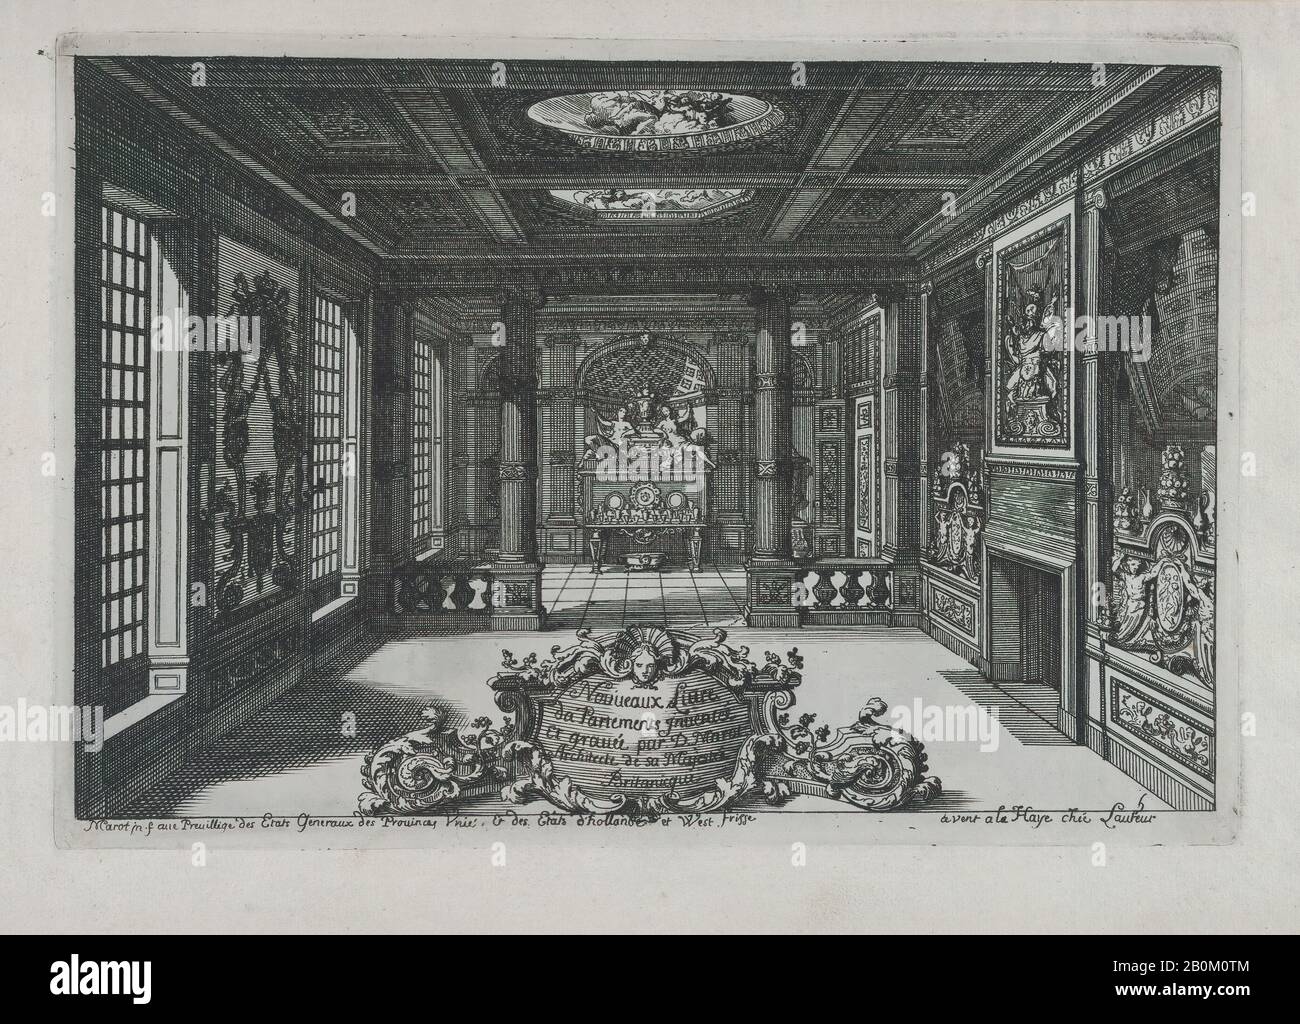 Daniel Marot the Elder, Title Plate with a Cartouche Set in a Lavish Interior, from Nouveaux Liure da Partements, part of Œuvres du Sr. D. Marot, Nouveaux Liure da Partements, Daniel Marot the Elder (French, Paris 1661–1752 The Hague), published 1703 or 1712, Etching, Sheet: 8 1/2 × 13 1/2 in. (21.6 × 34.3 cm), Plate: 7 5/16 × 10 11/16 in. (18.5 × 27.1 cm Stock Photo